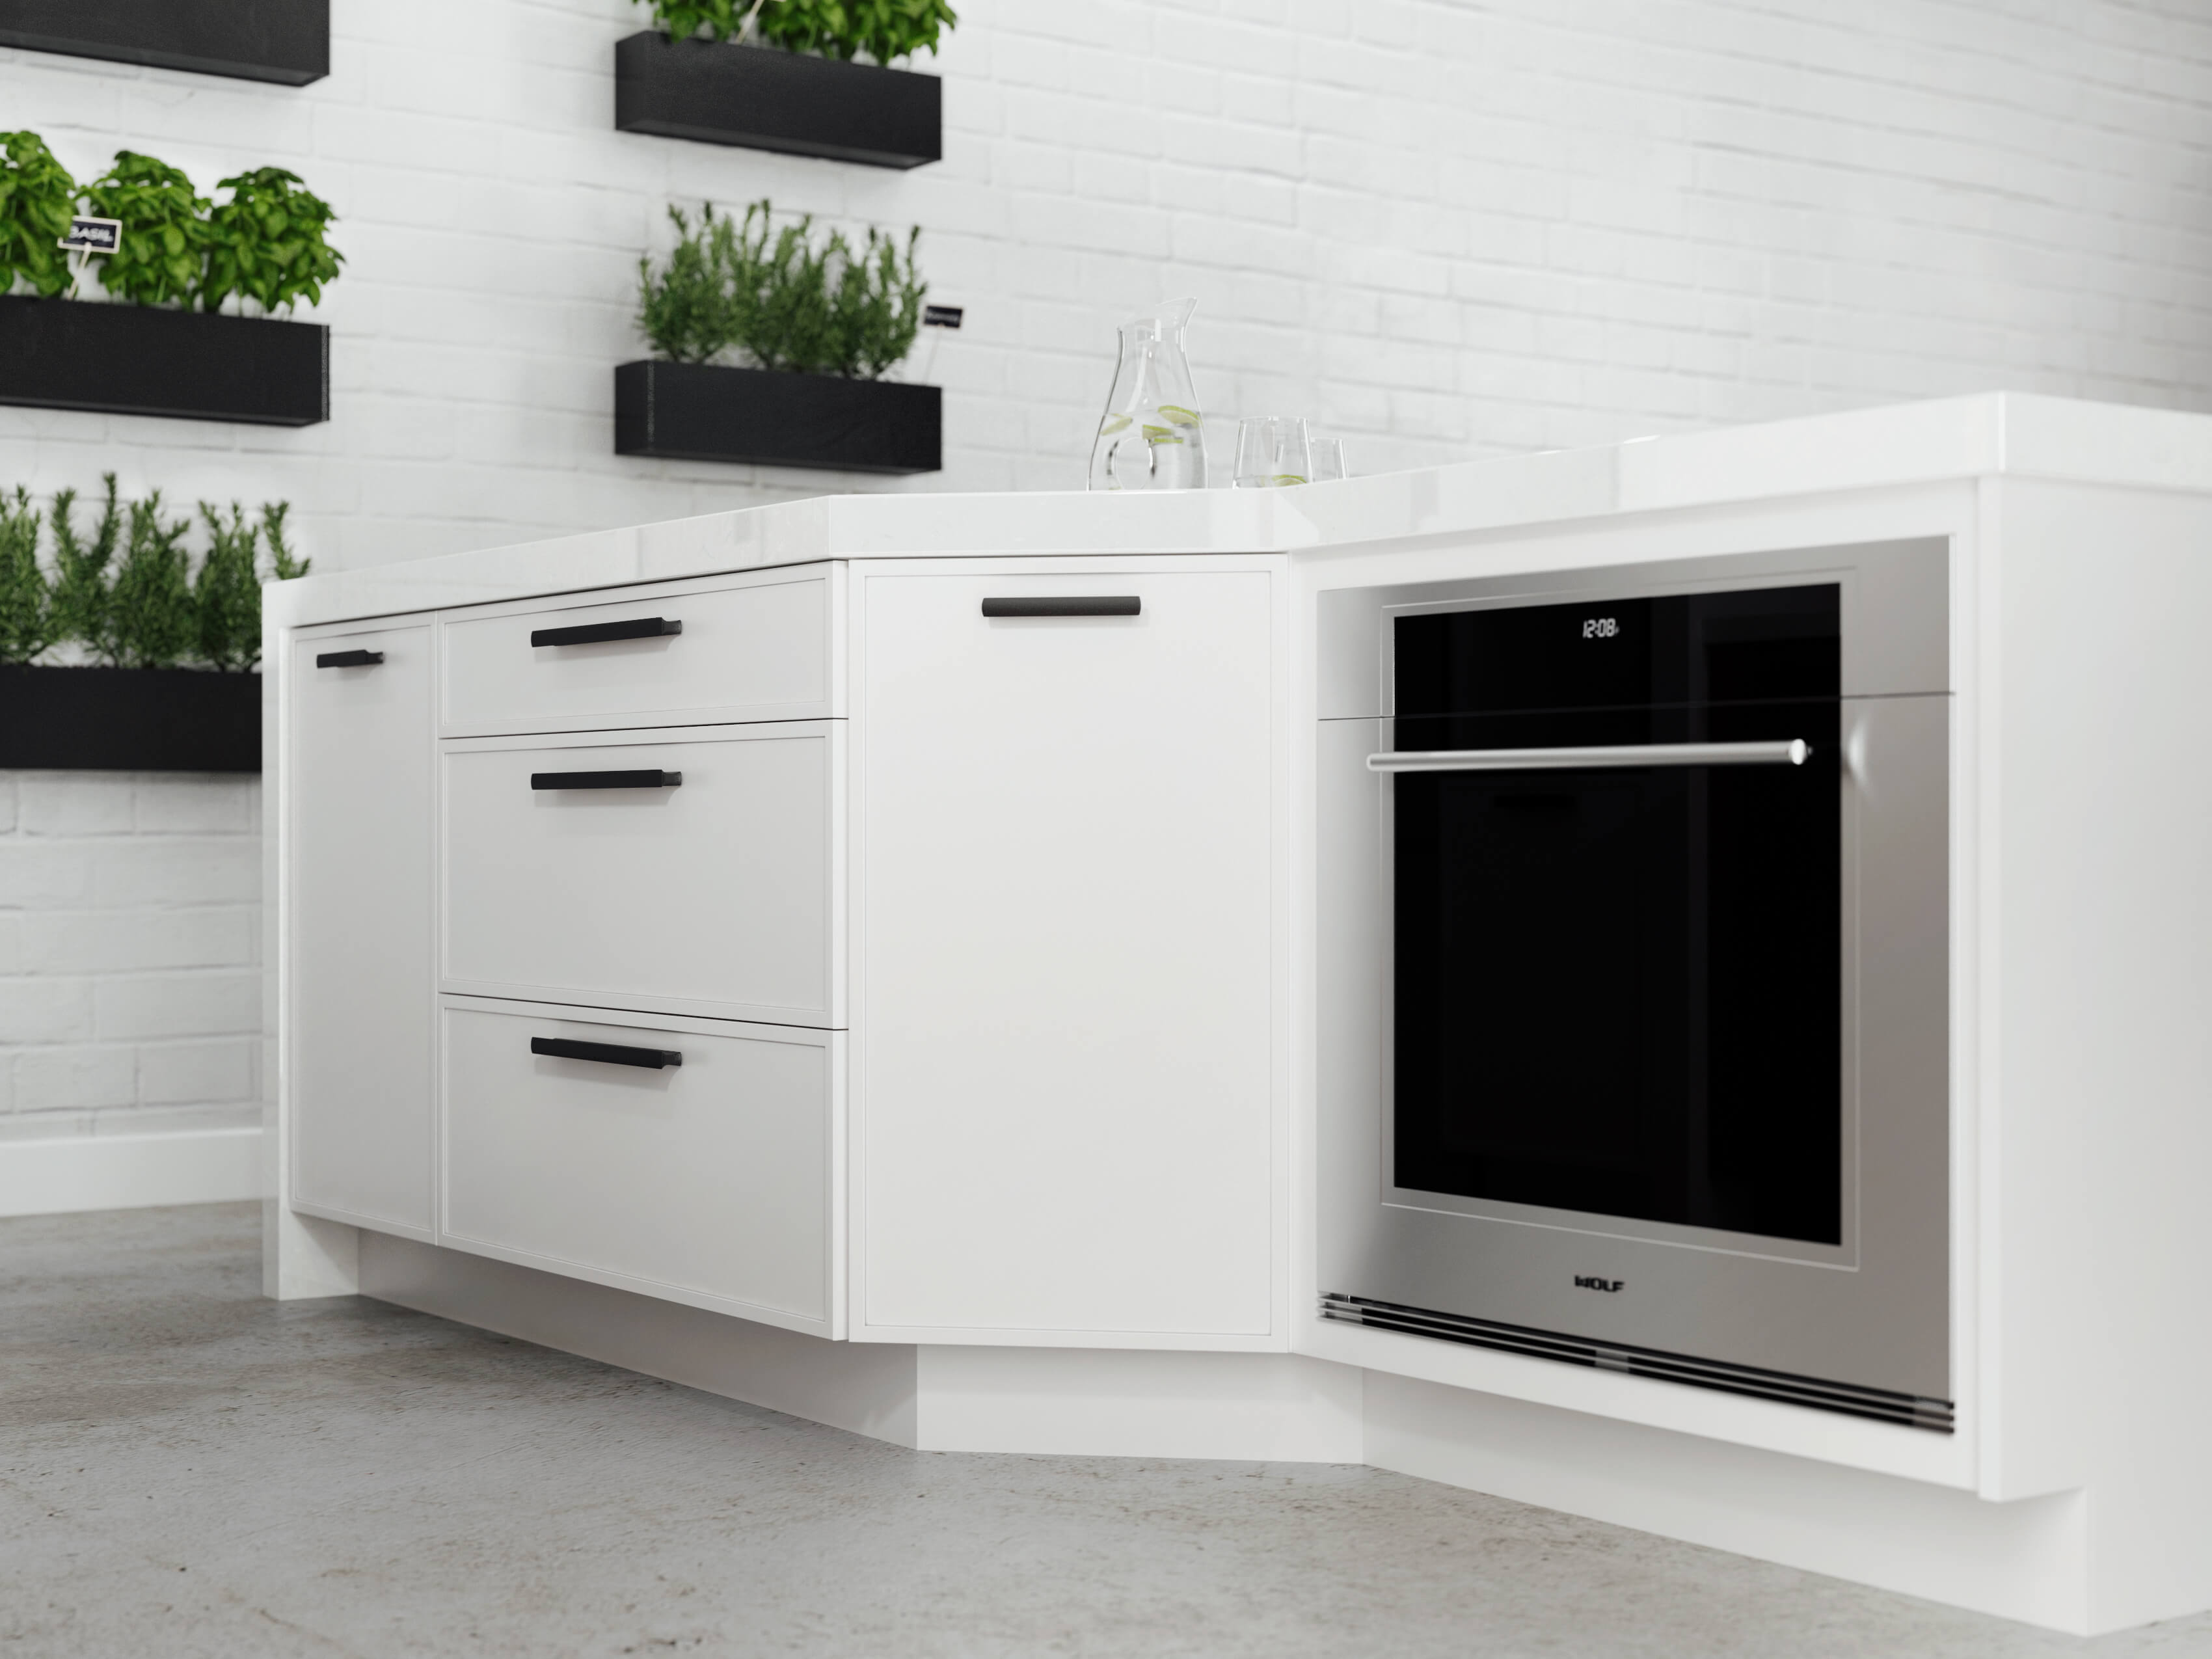 A bright white kitchen island with modern shaker cabinet doors that have skinny stiles and profiles.